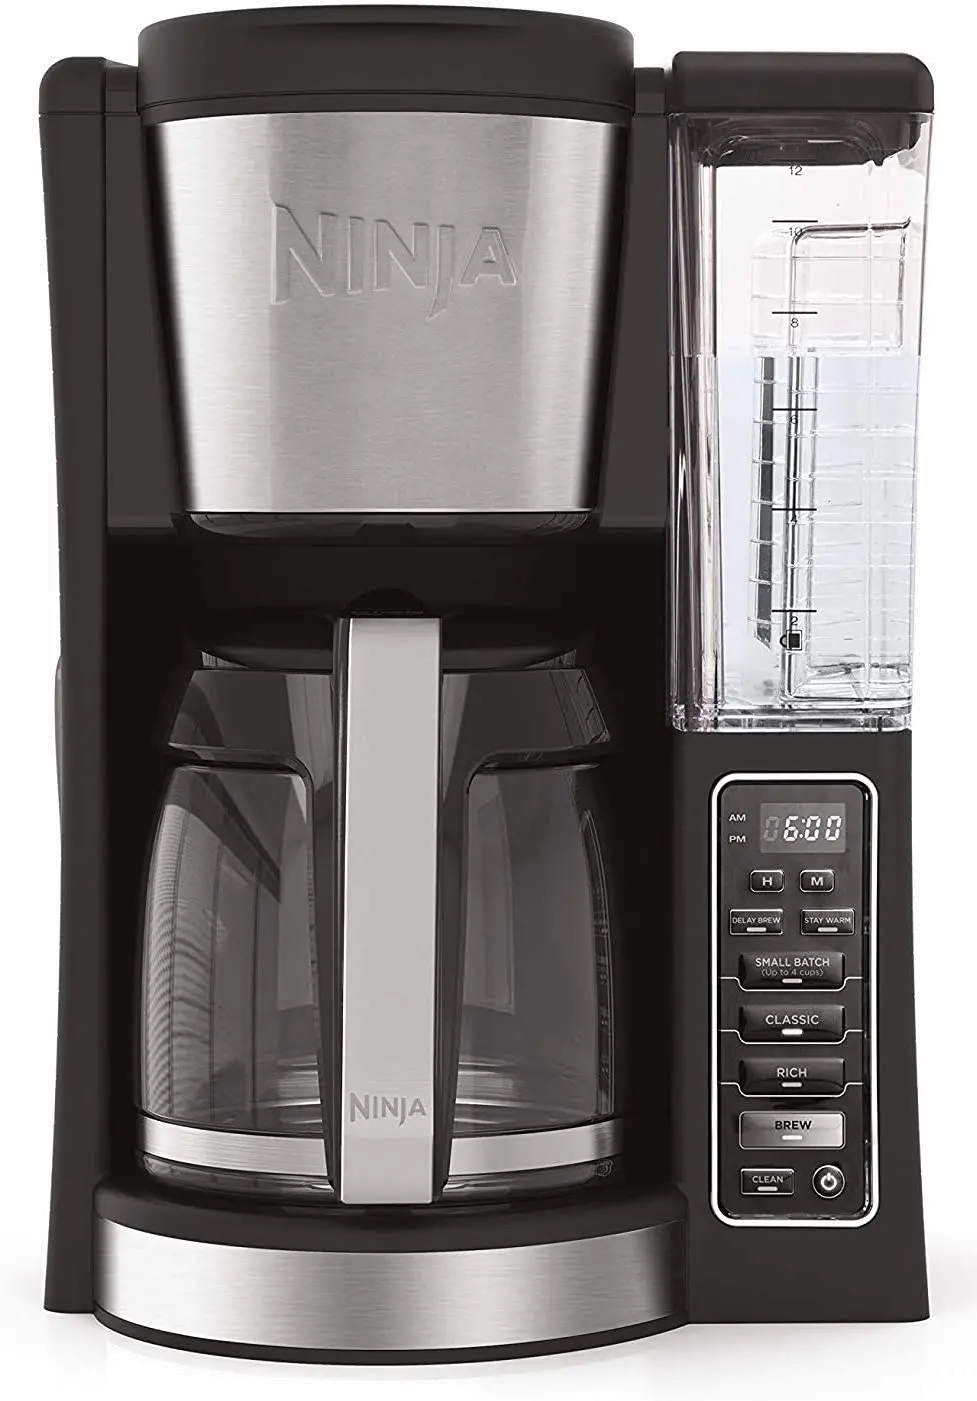 Ninja CE251 12-Cup Programmable Brewer Coffee Maker - Silver for